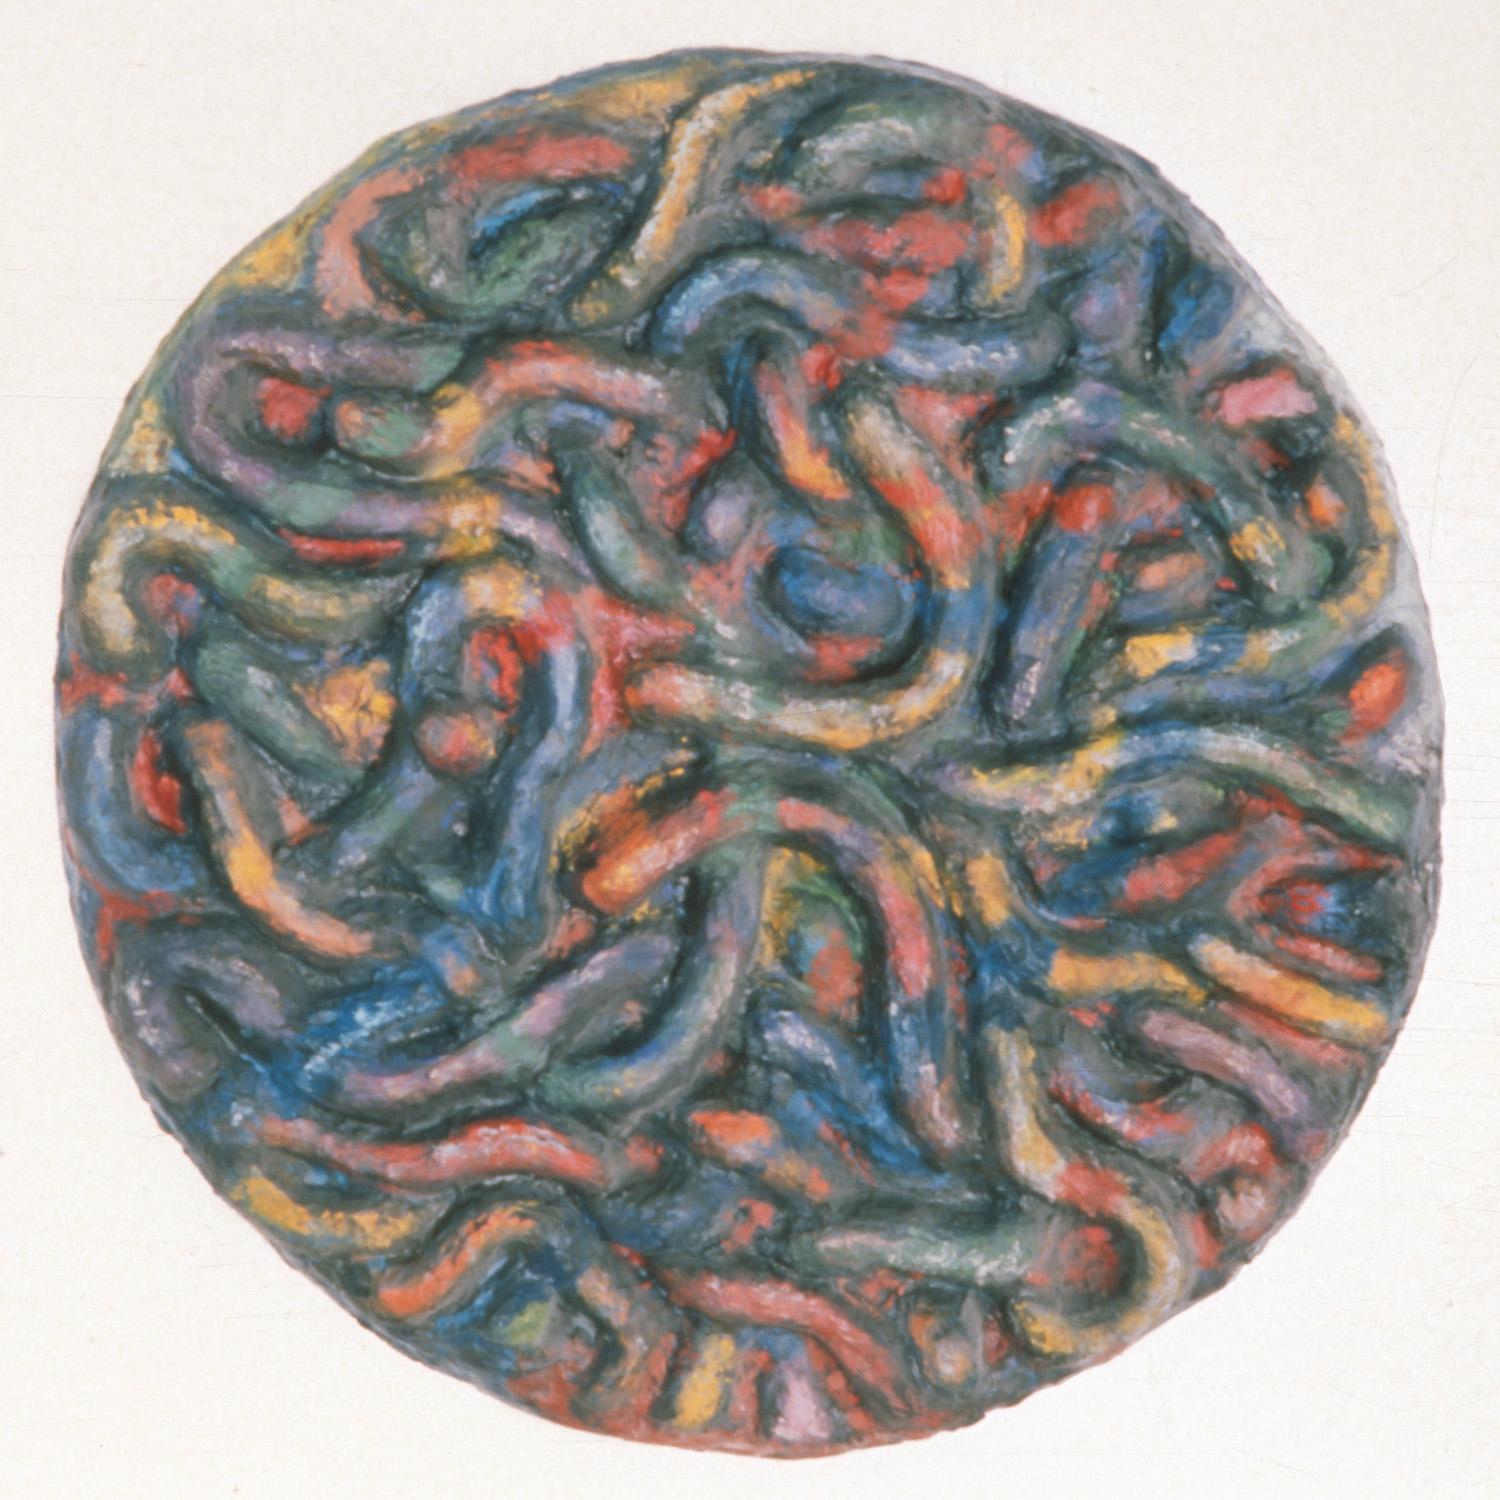 "Medusa", circular wall relief of interwoven serpentine forms in blues and reds - Sculpture by Howard Kalish